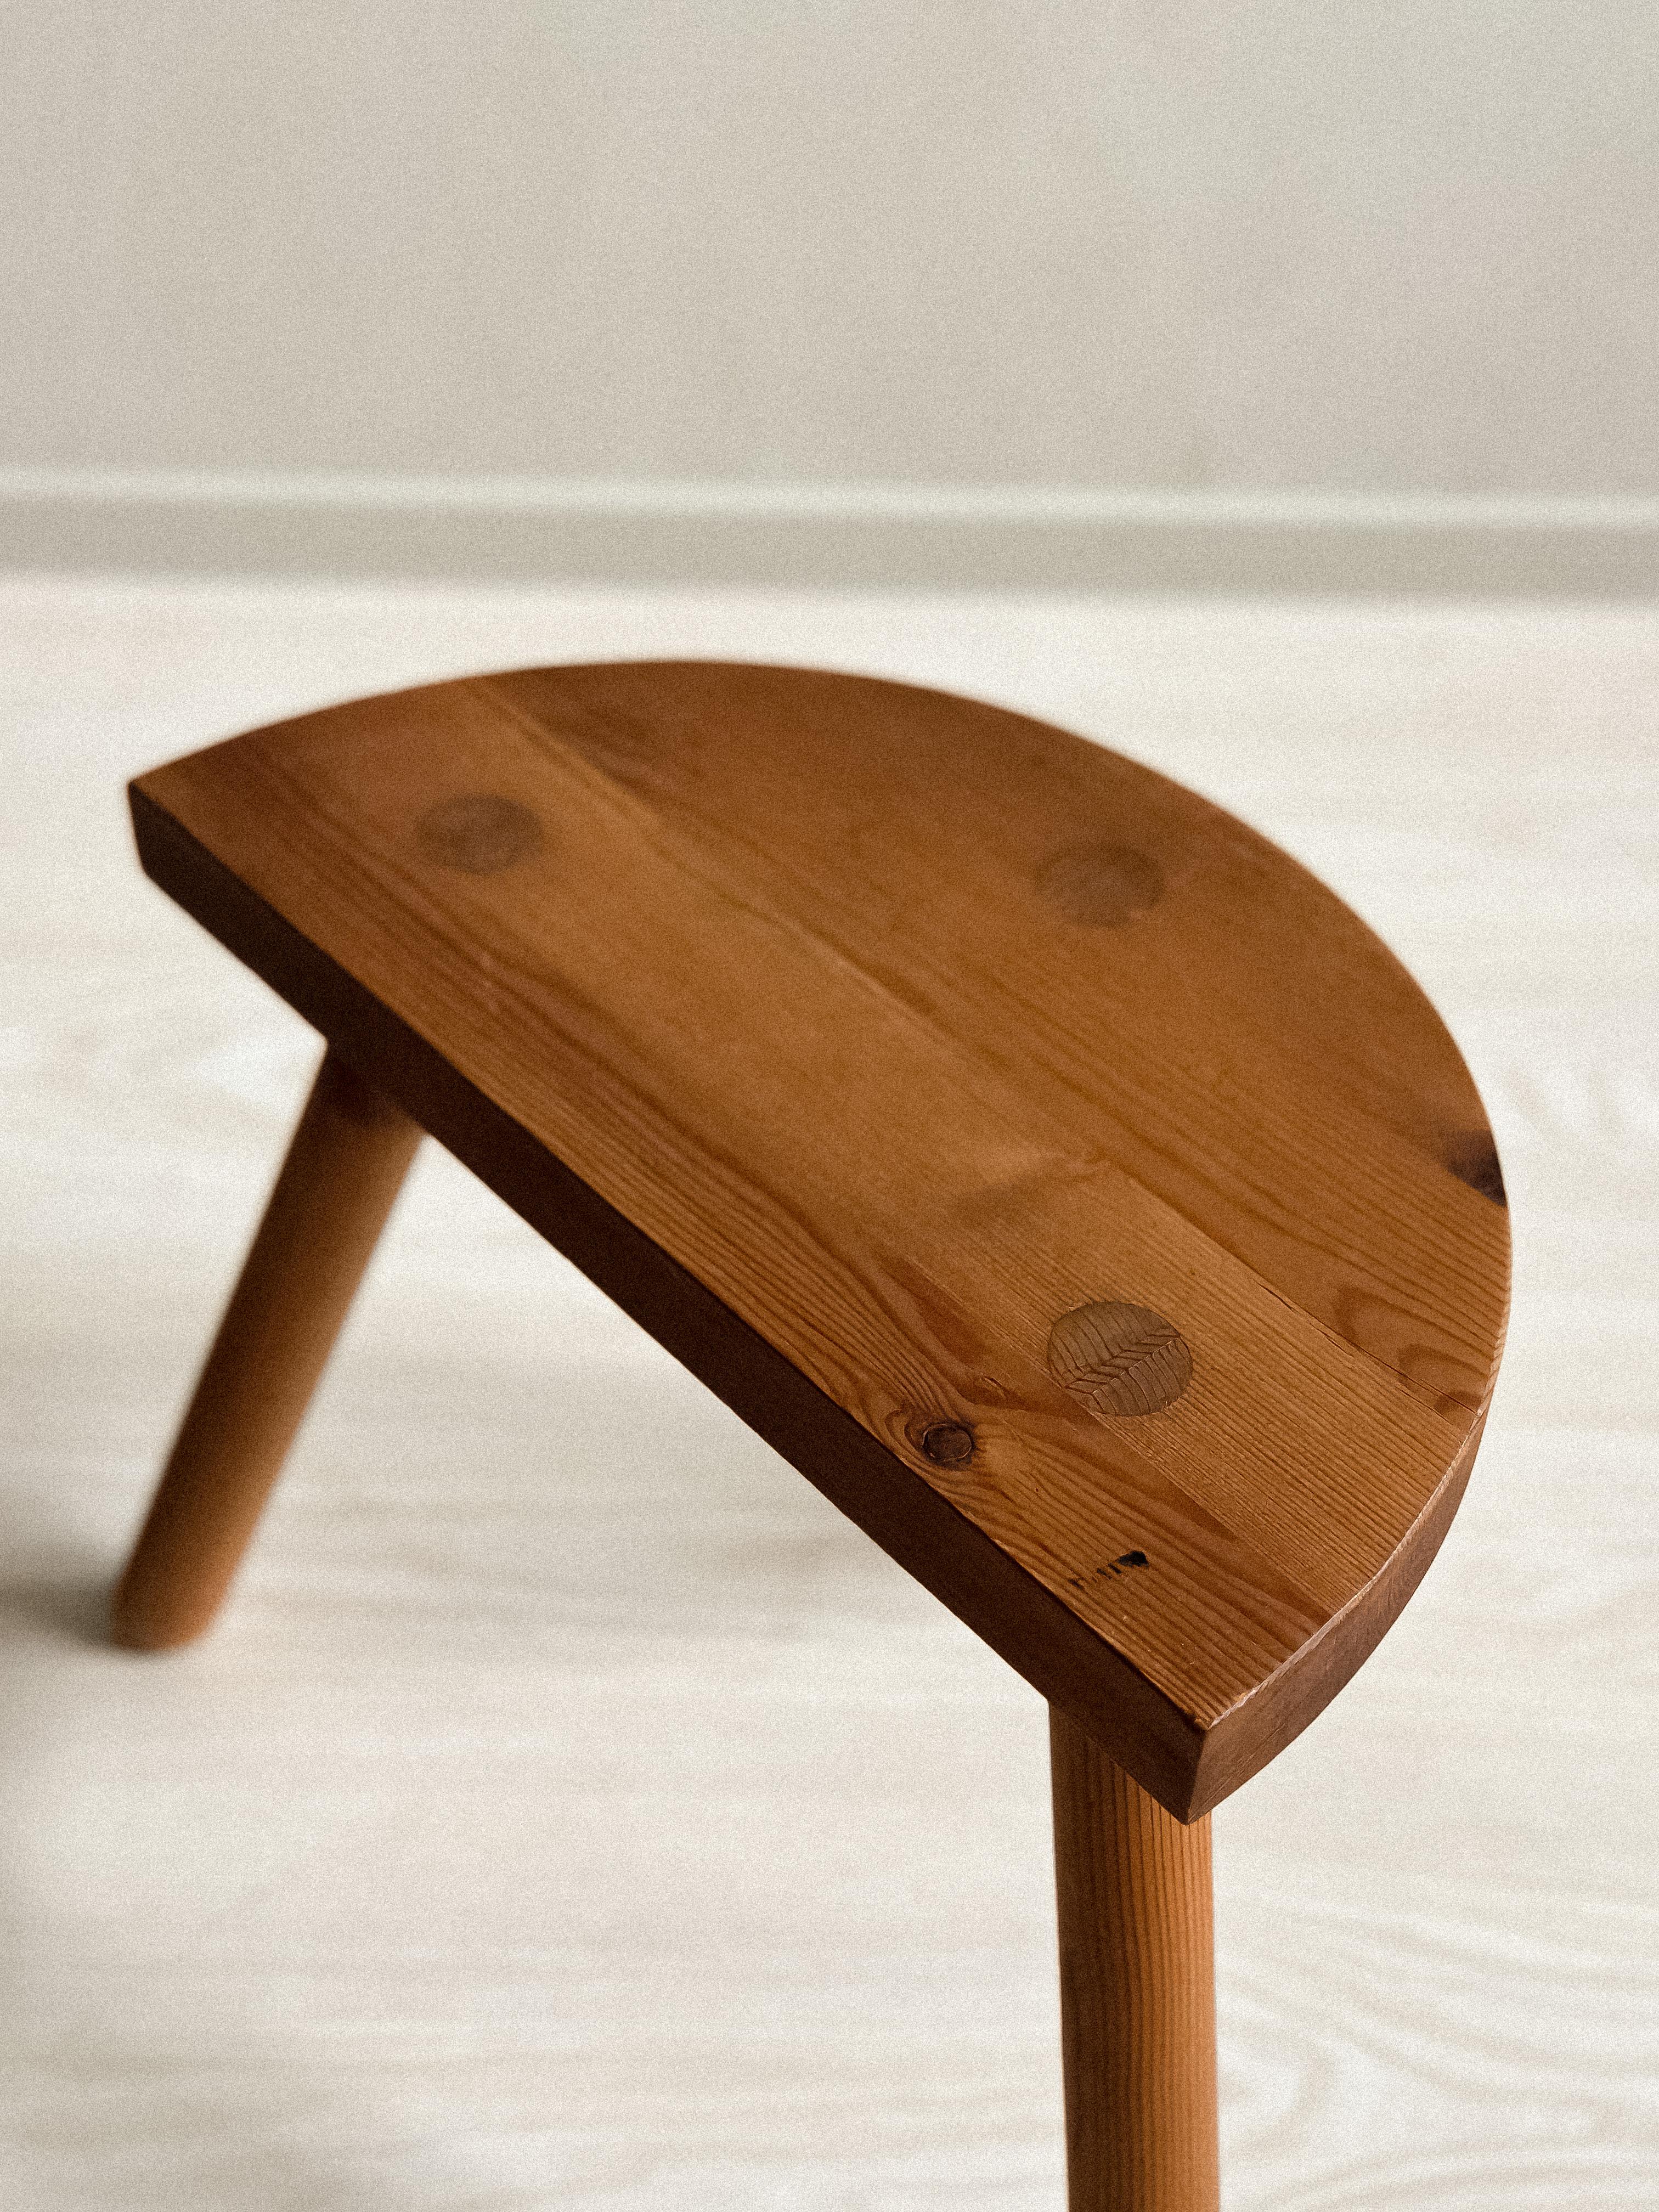 A Mid-Century Scandinavian Milking Stool, Norway c. 1960s  In Good Condition For Sale In Hønefoss, 30